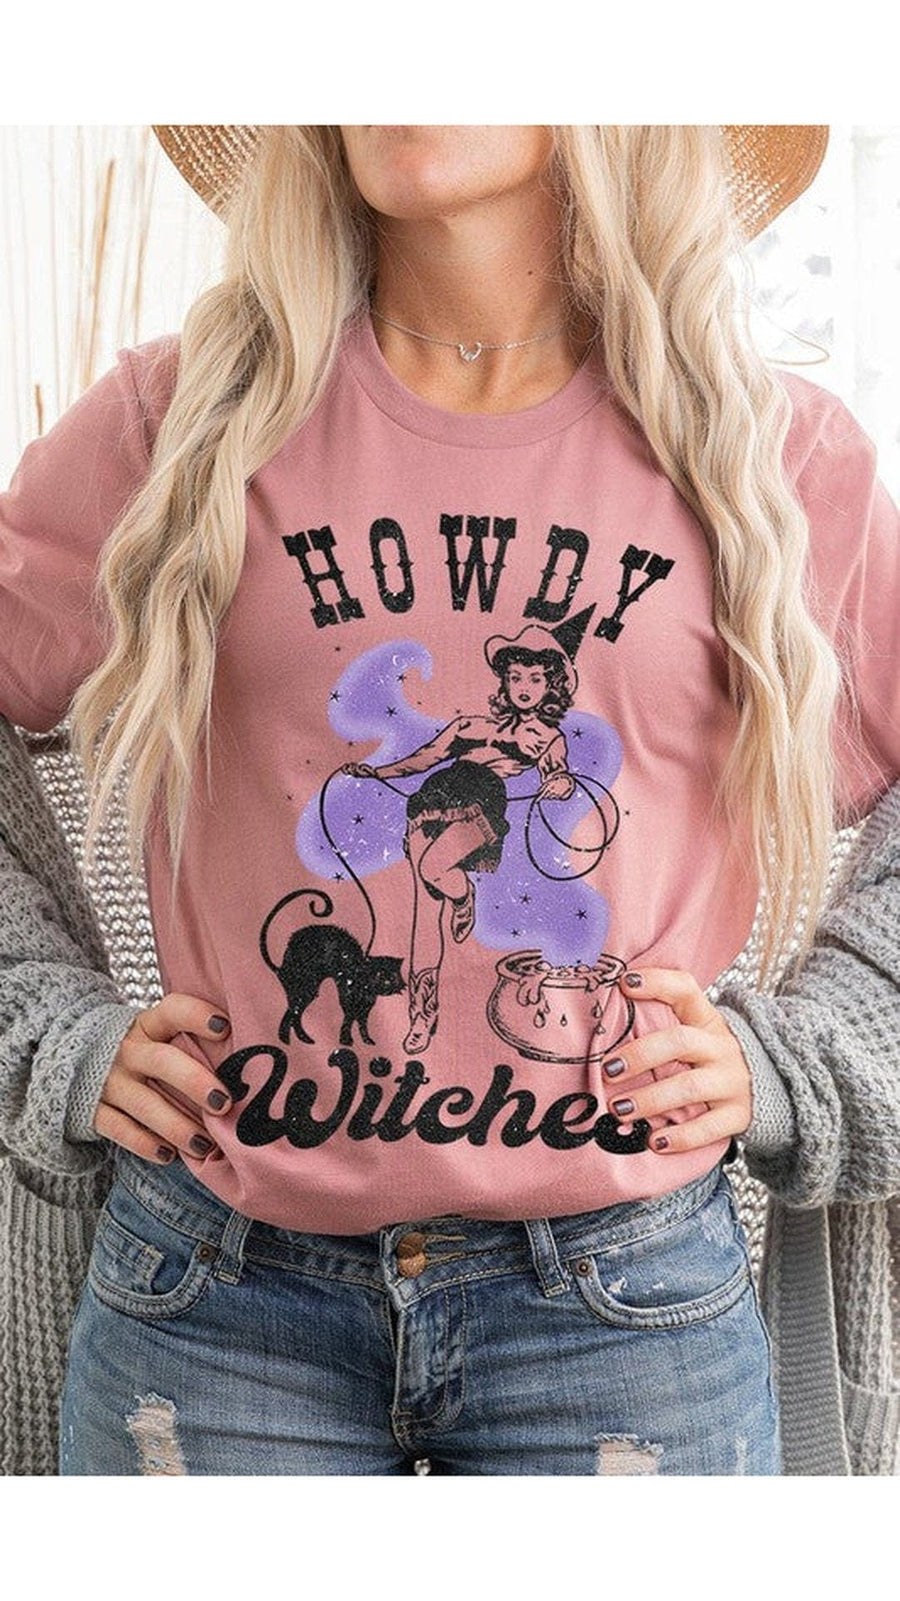 Howdy Witches Graphic T-Shirt